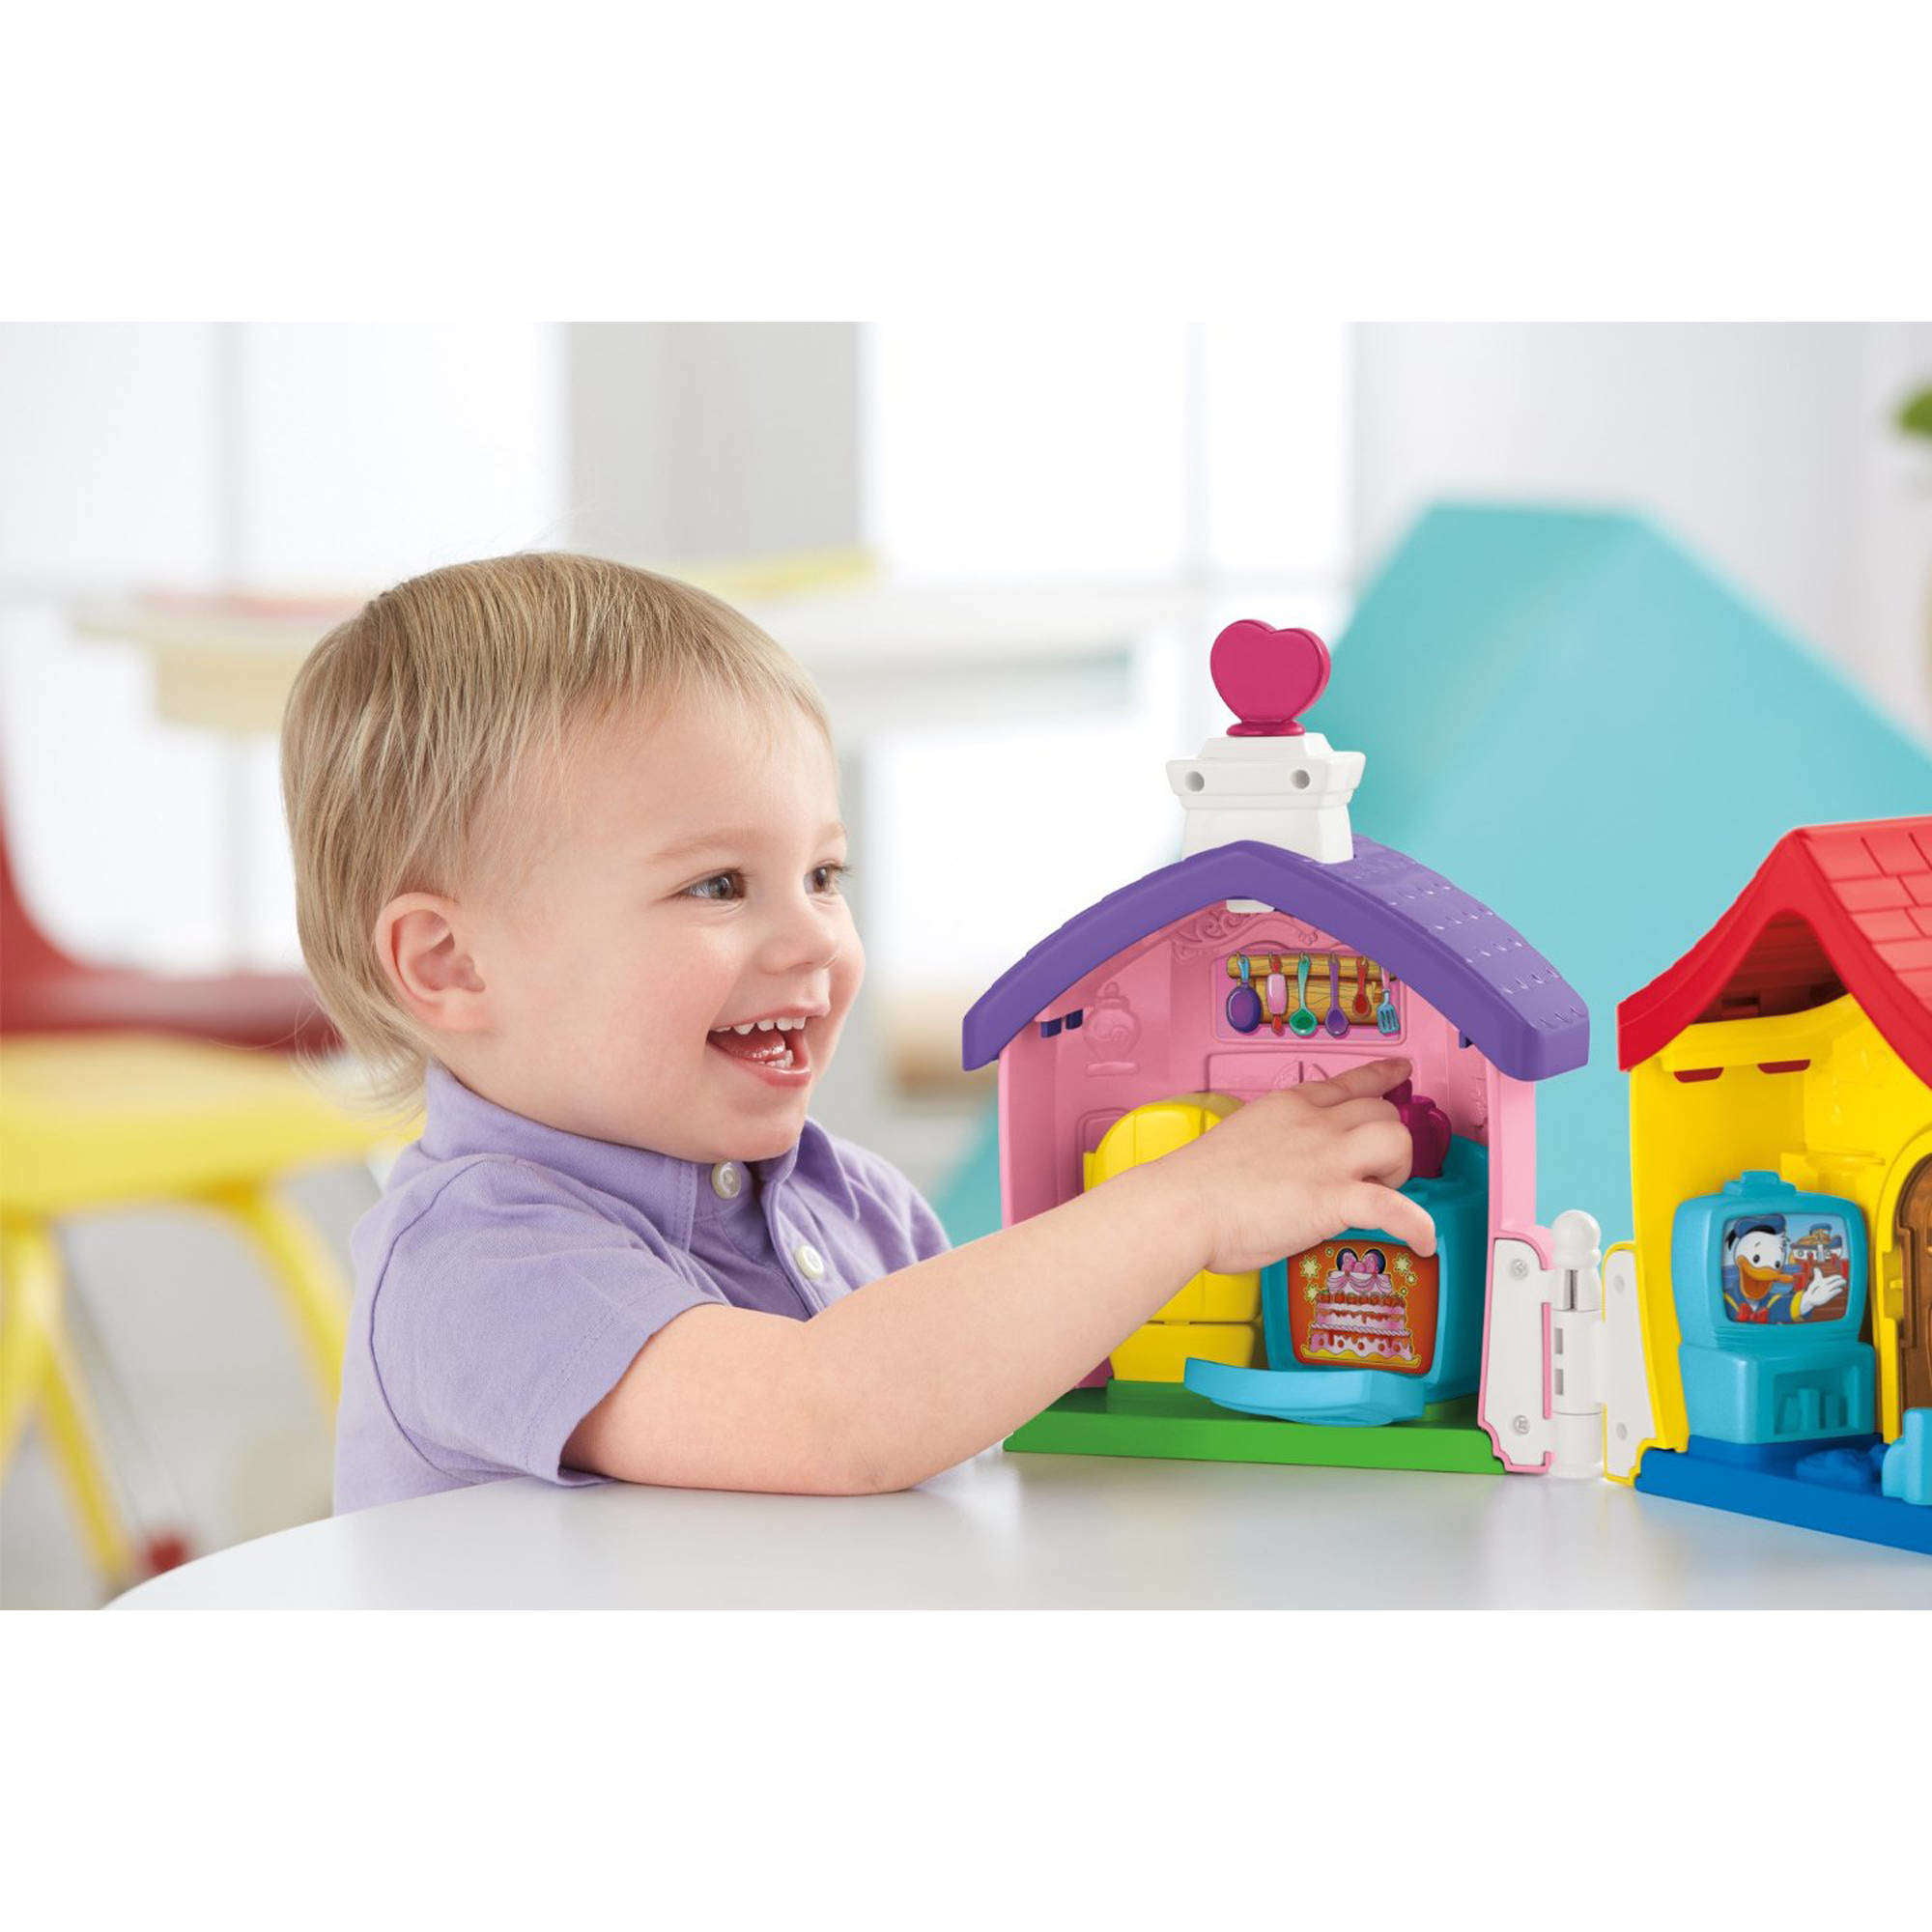 Fisher-Price Magic of Disney Mickey and Minnie's House Playset by Little People for sale online